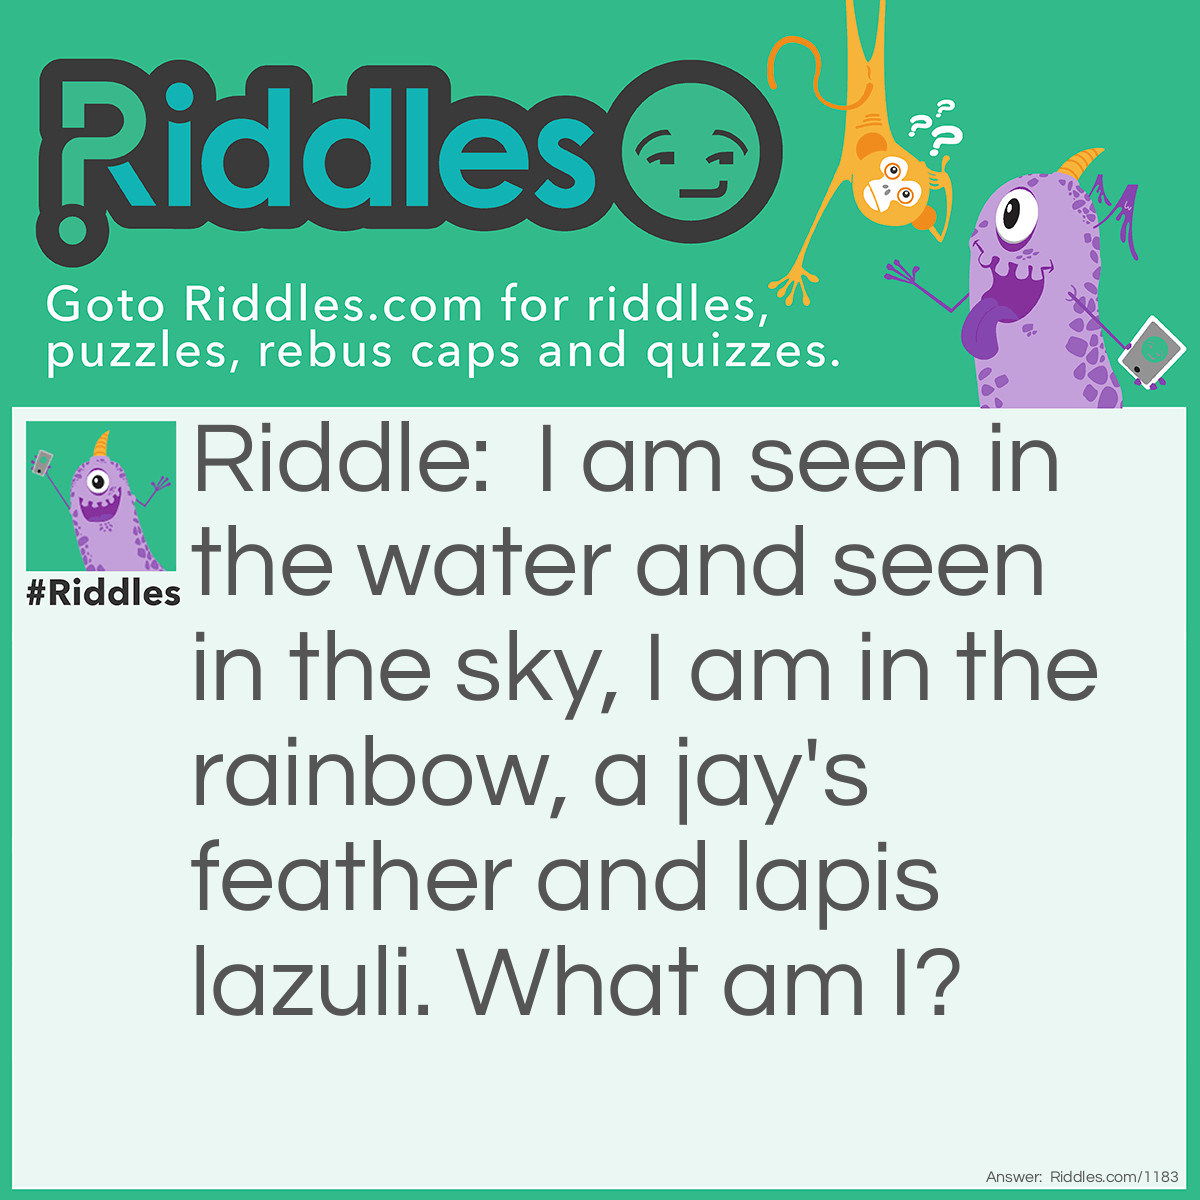 Riddle: I am seen in the water and seen in the sky, I am in the rainbow, a jay's feather, and lapis lazuli. What am I? Answer: The color blue.